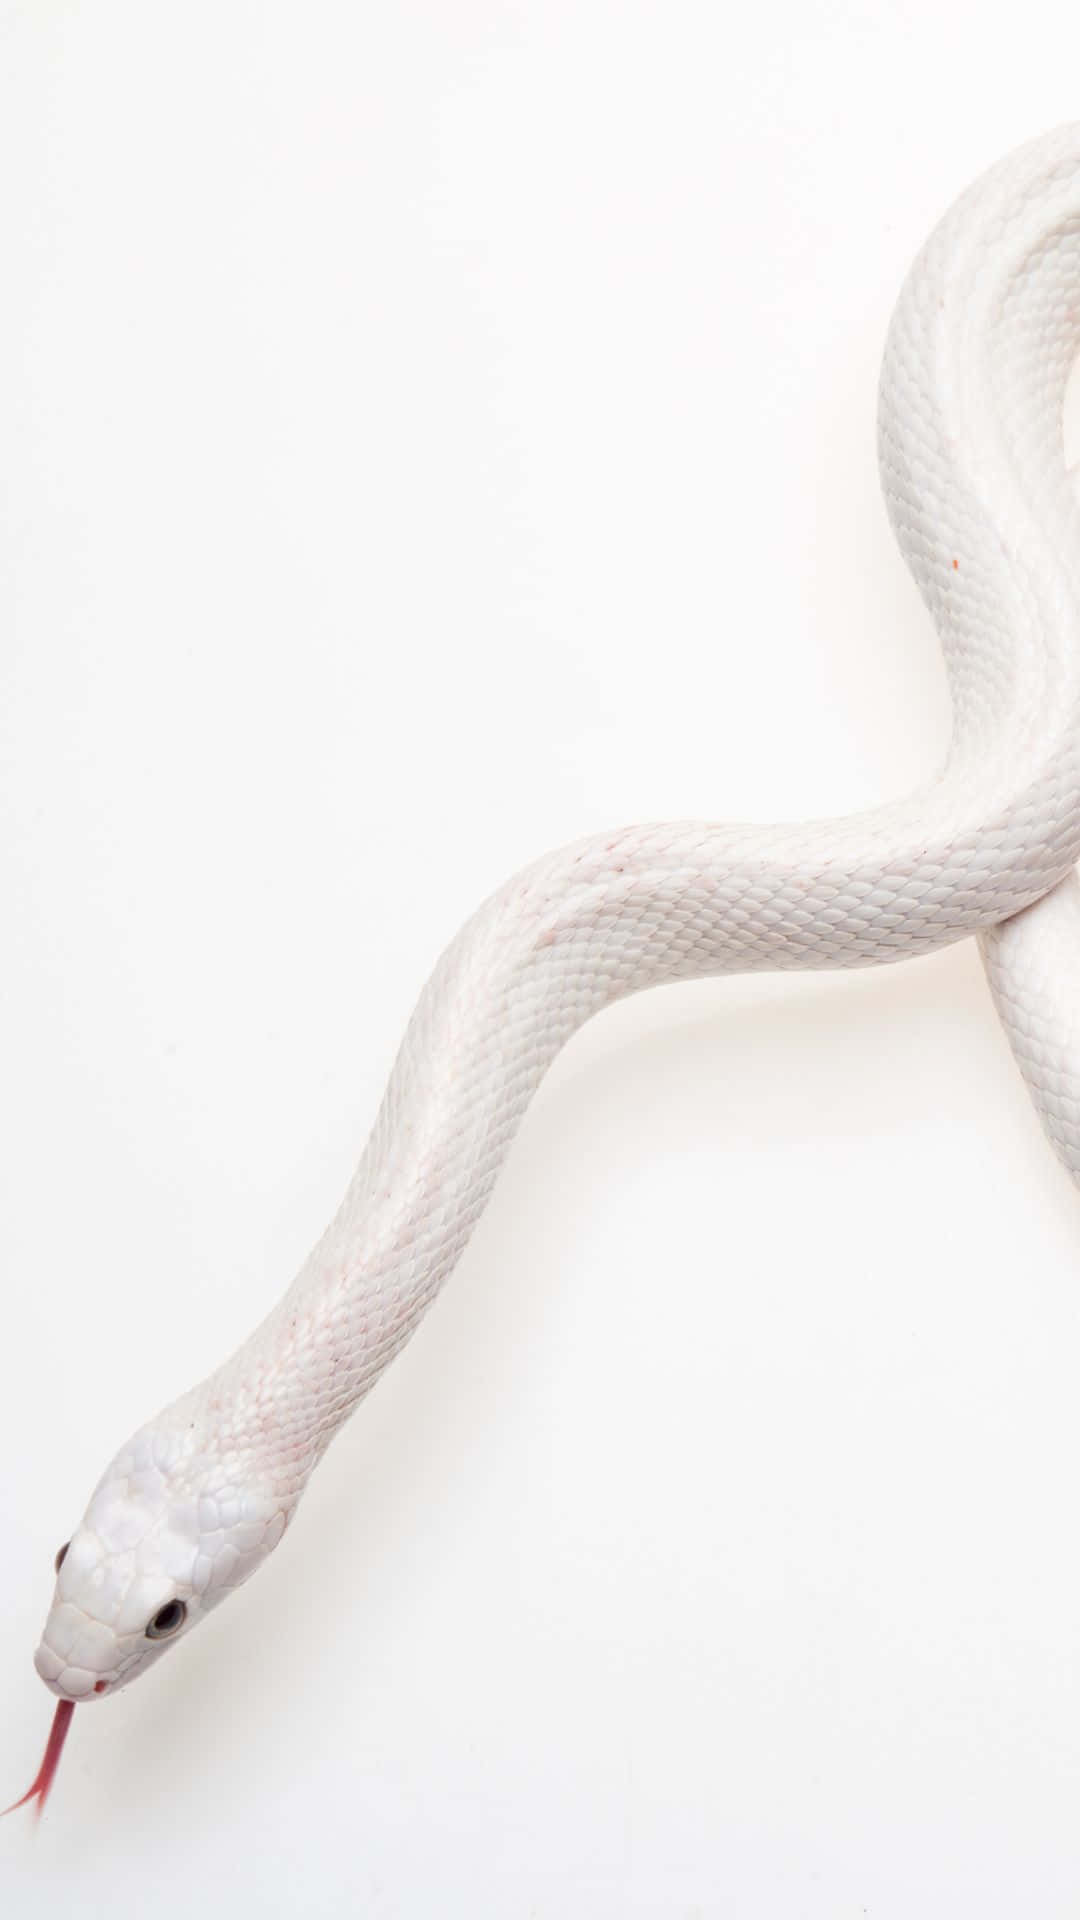 Cool Snake In Pure White